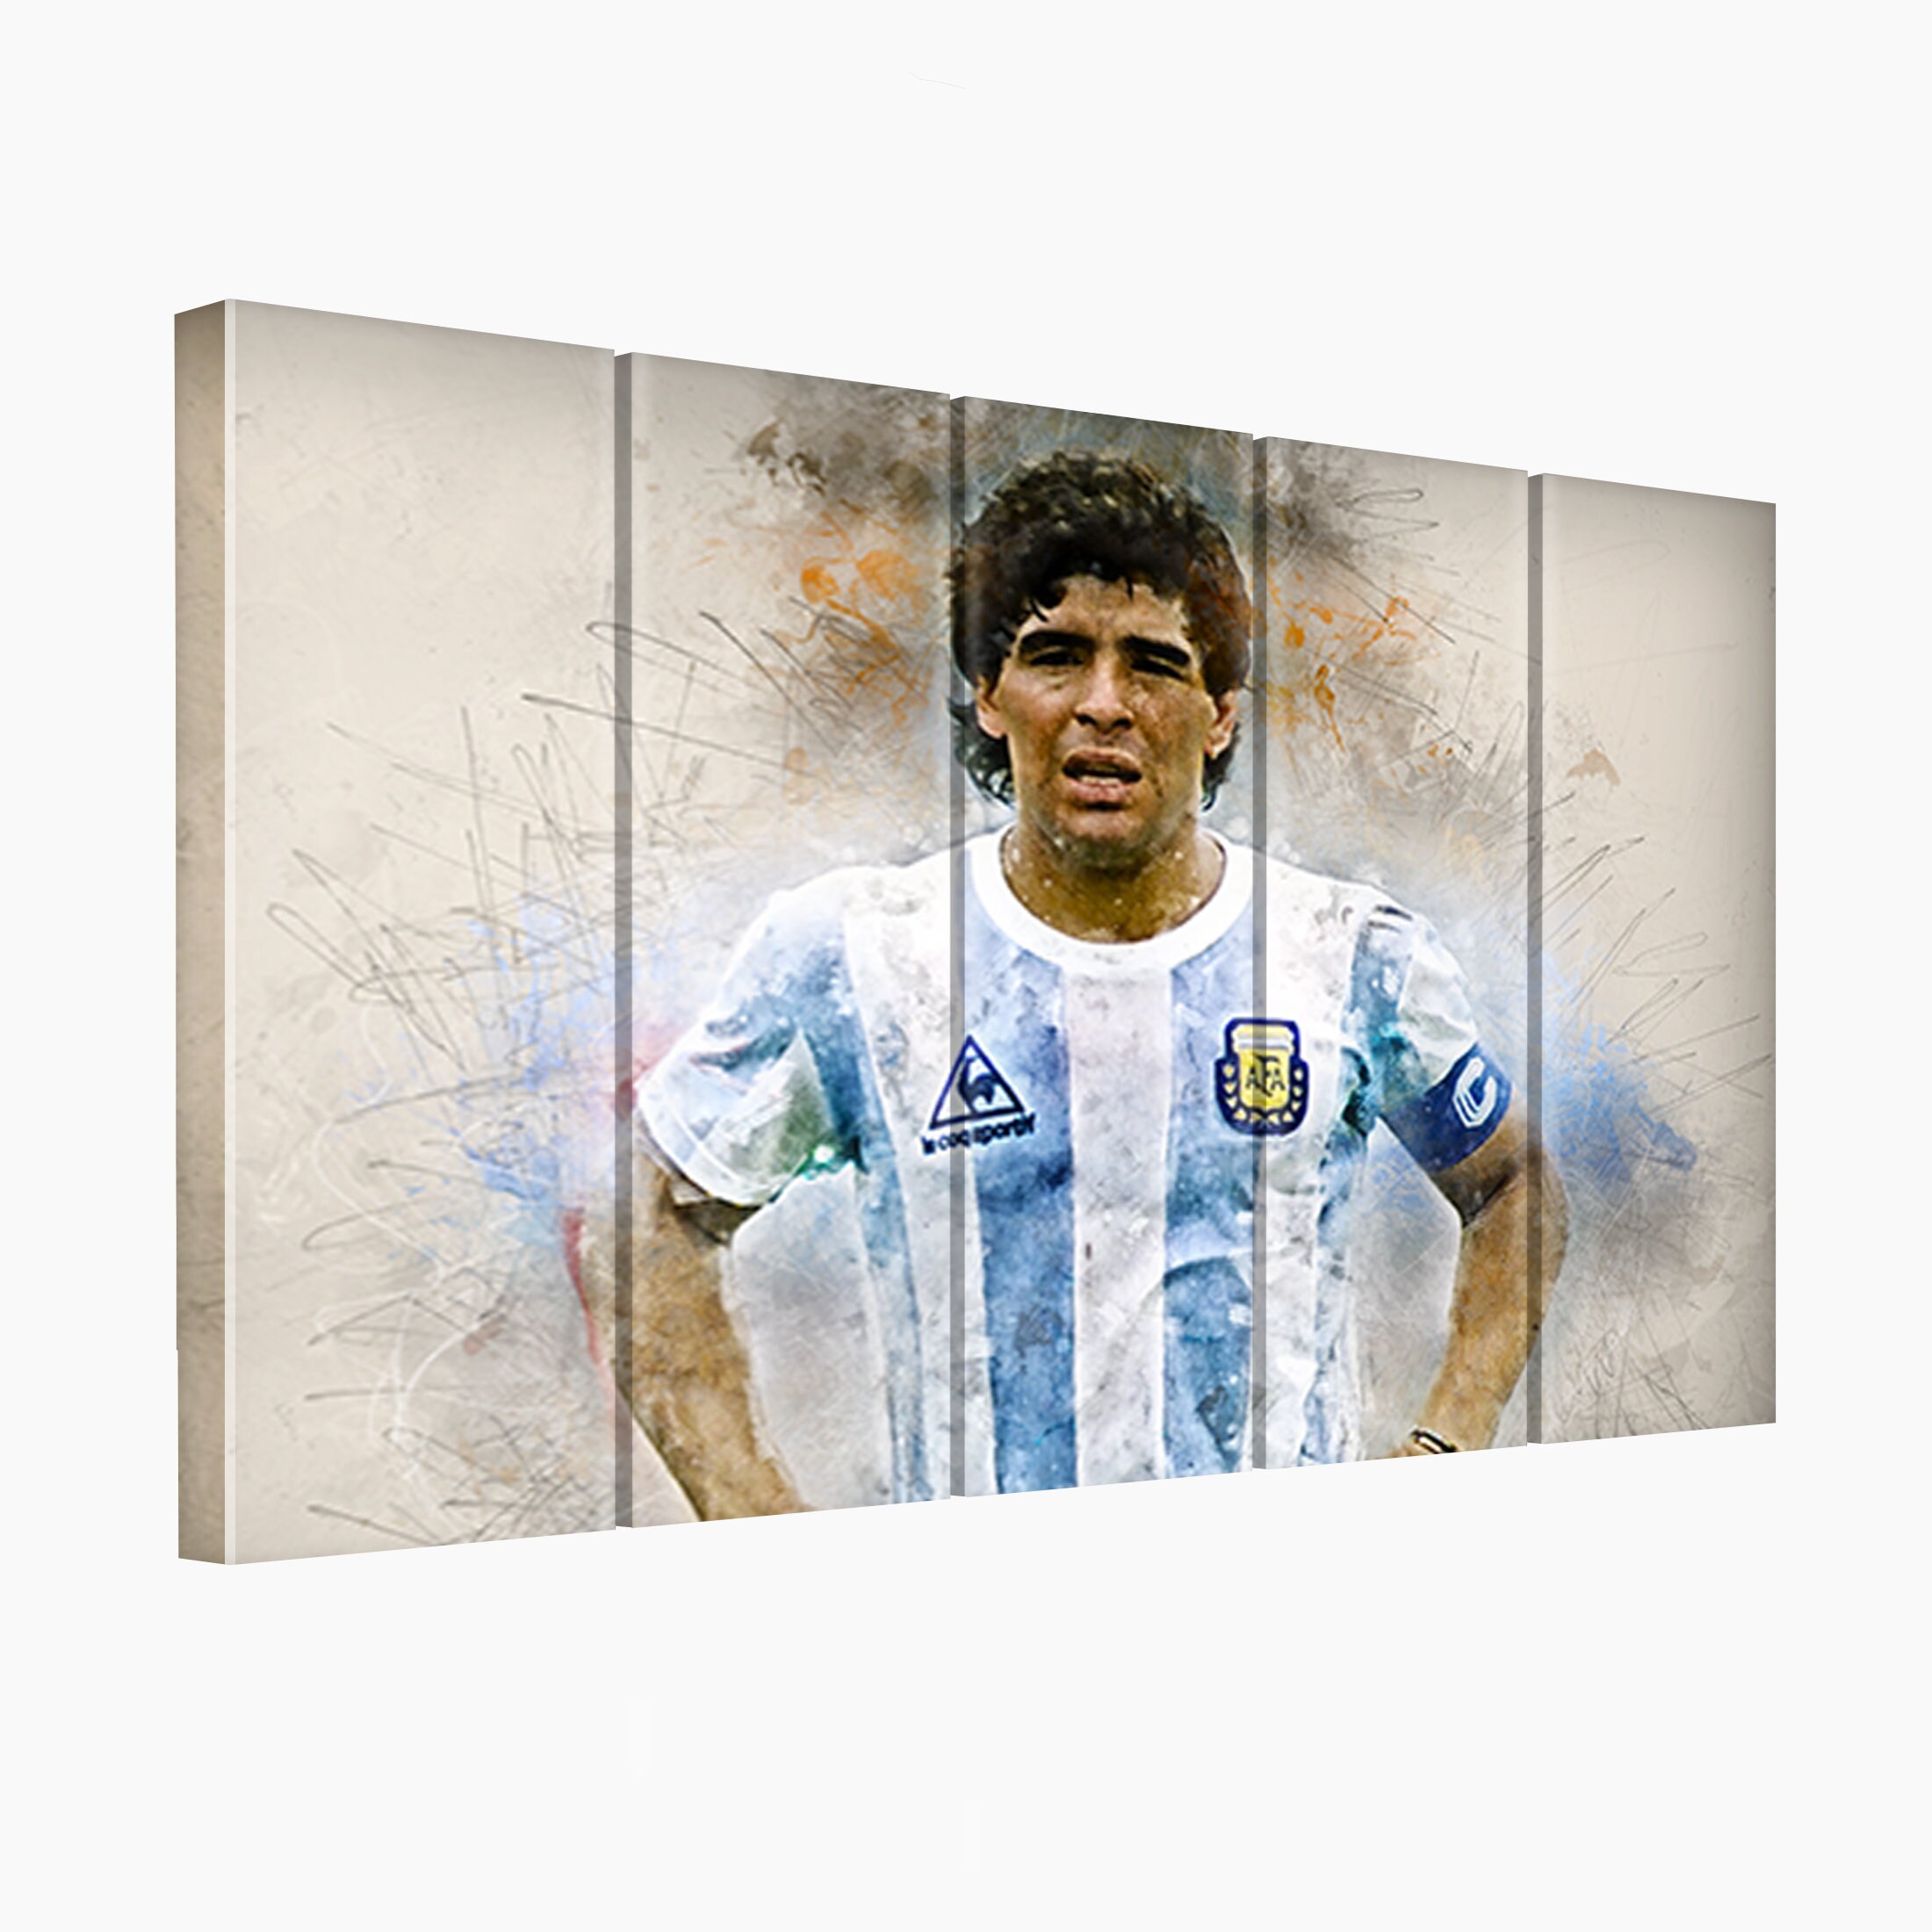 Zidane Pele Maradona Play Table Soccer Poster Canvas Cloth Fabric Print  Painting for Home Decor Wall Art Picture